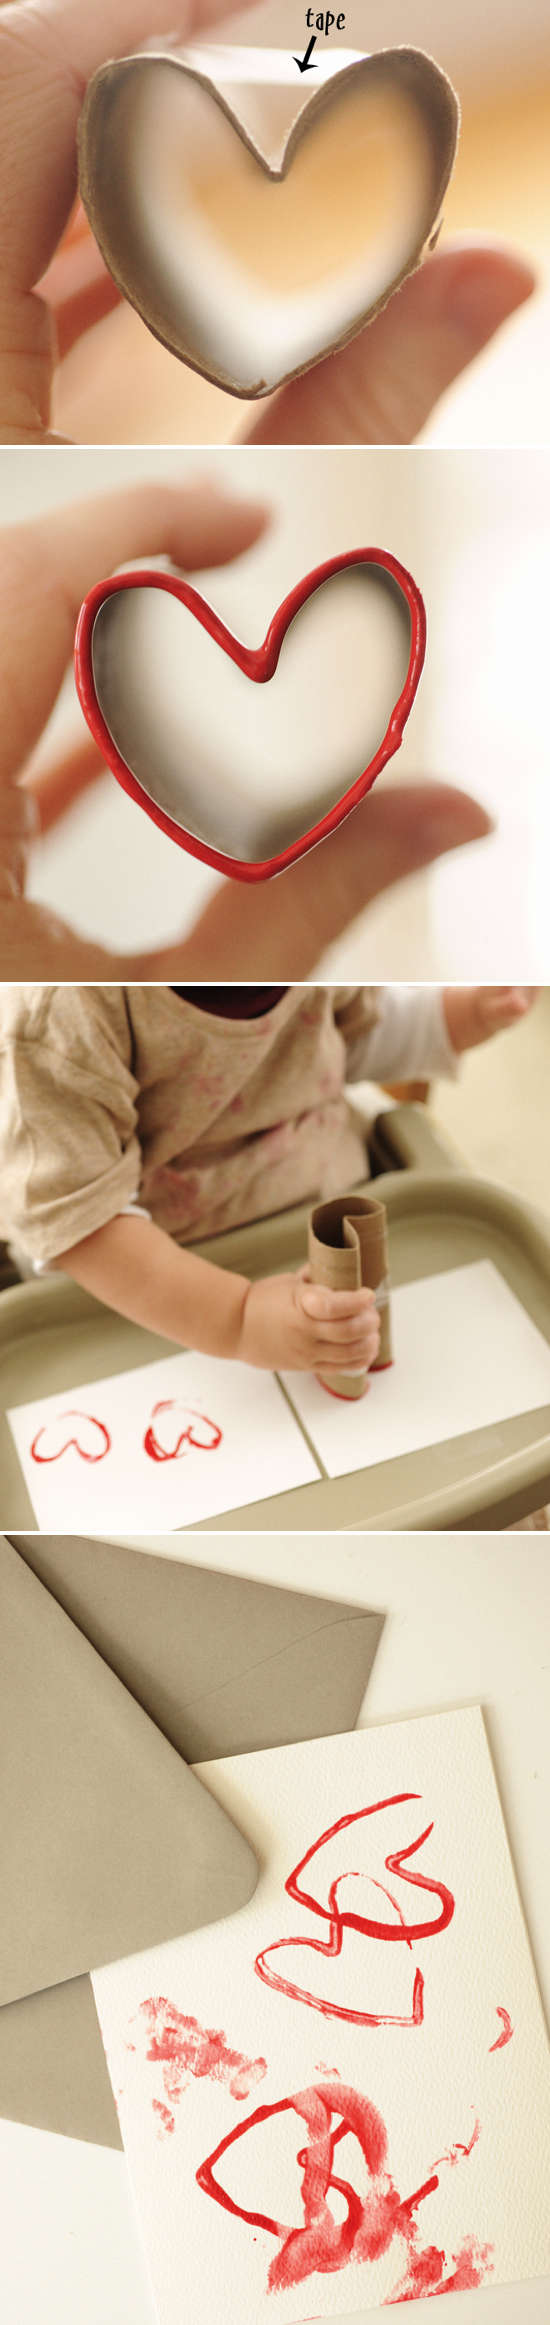 Toilet paper heart shaped paint stamps crafts